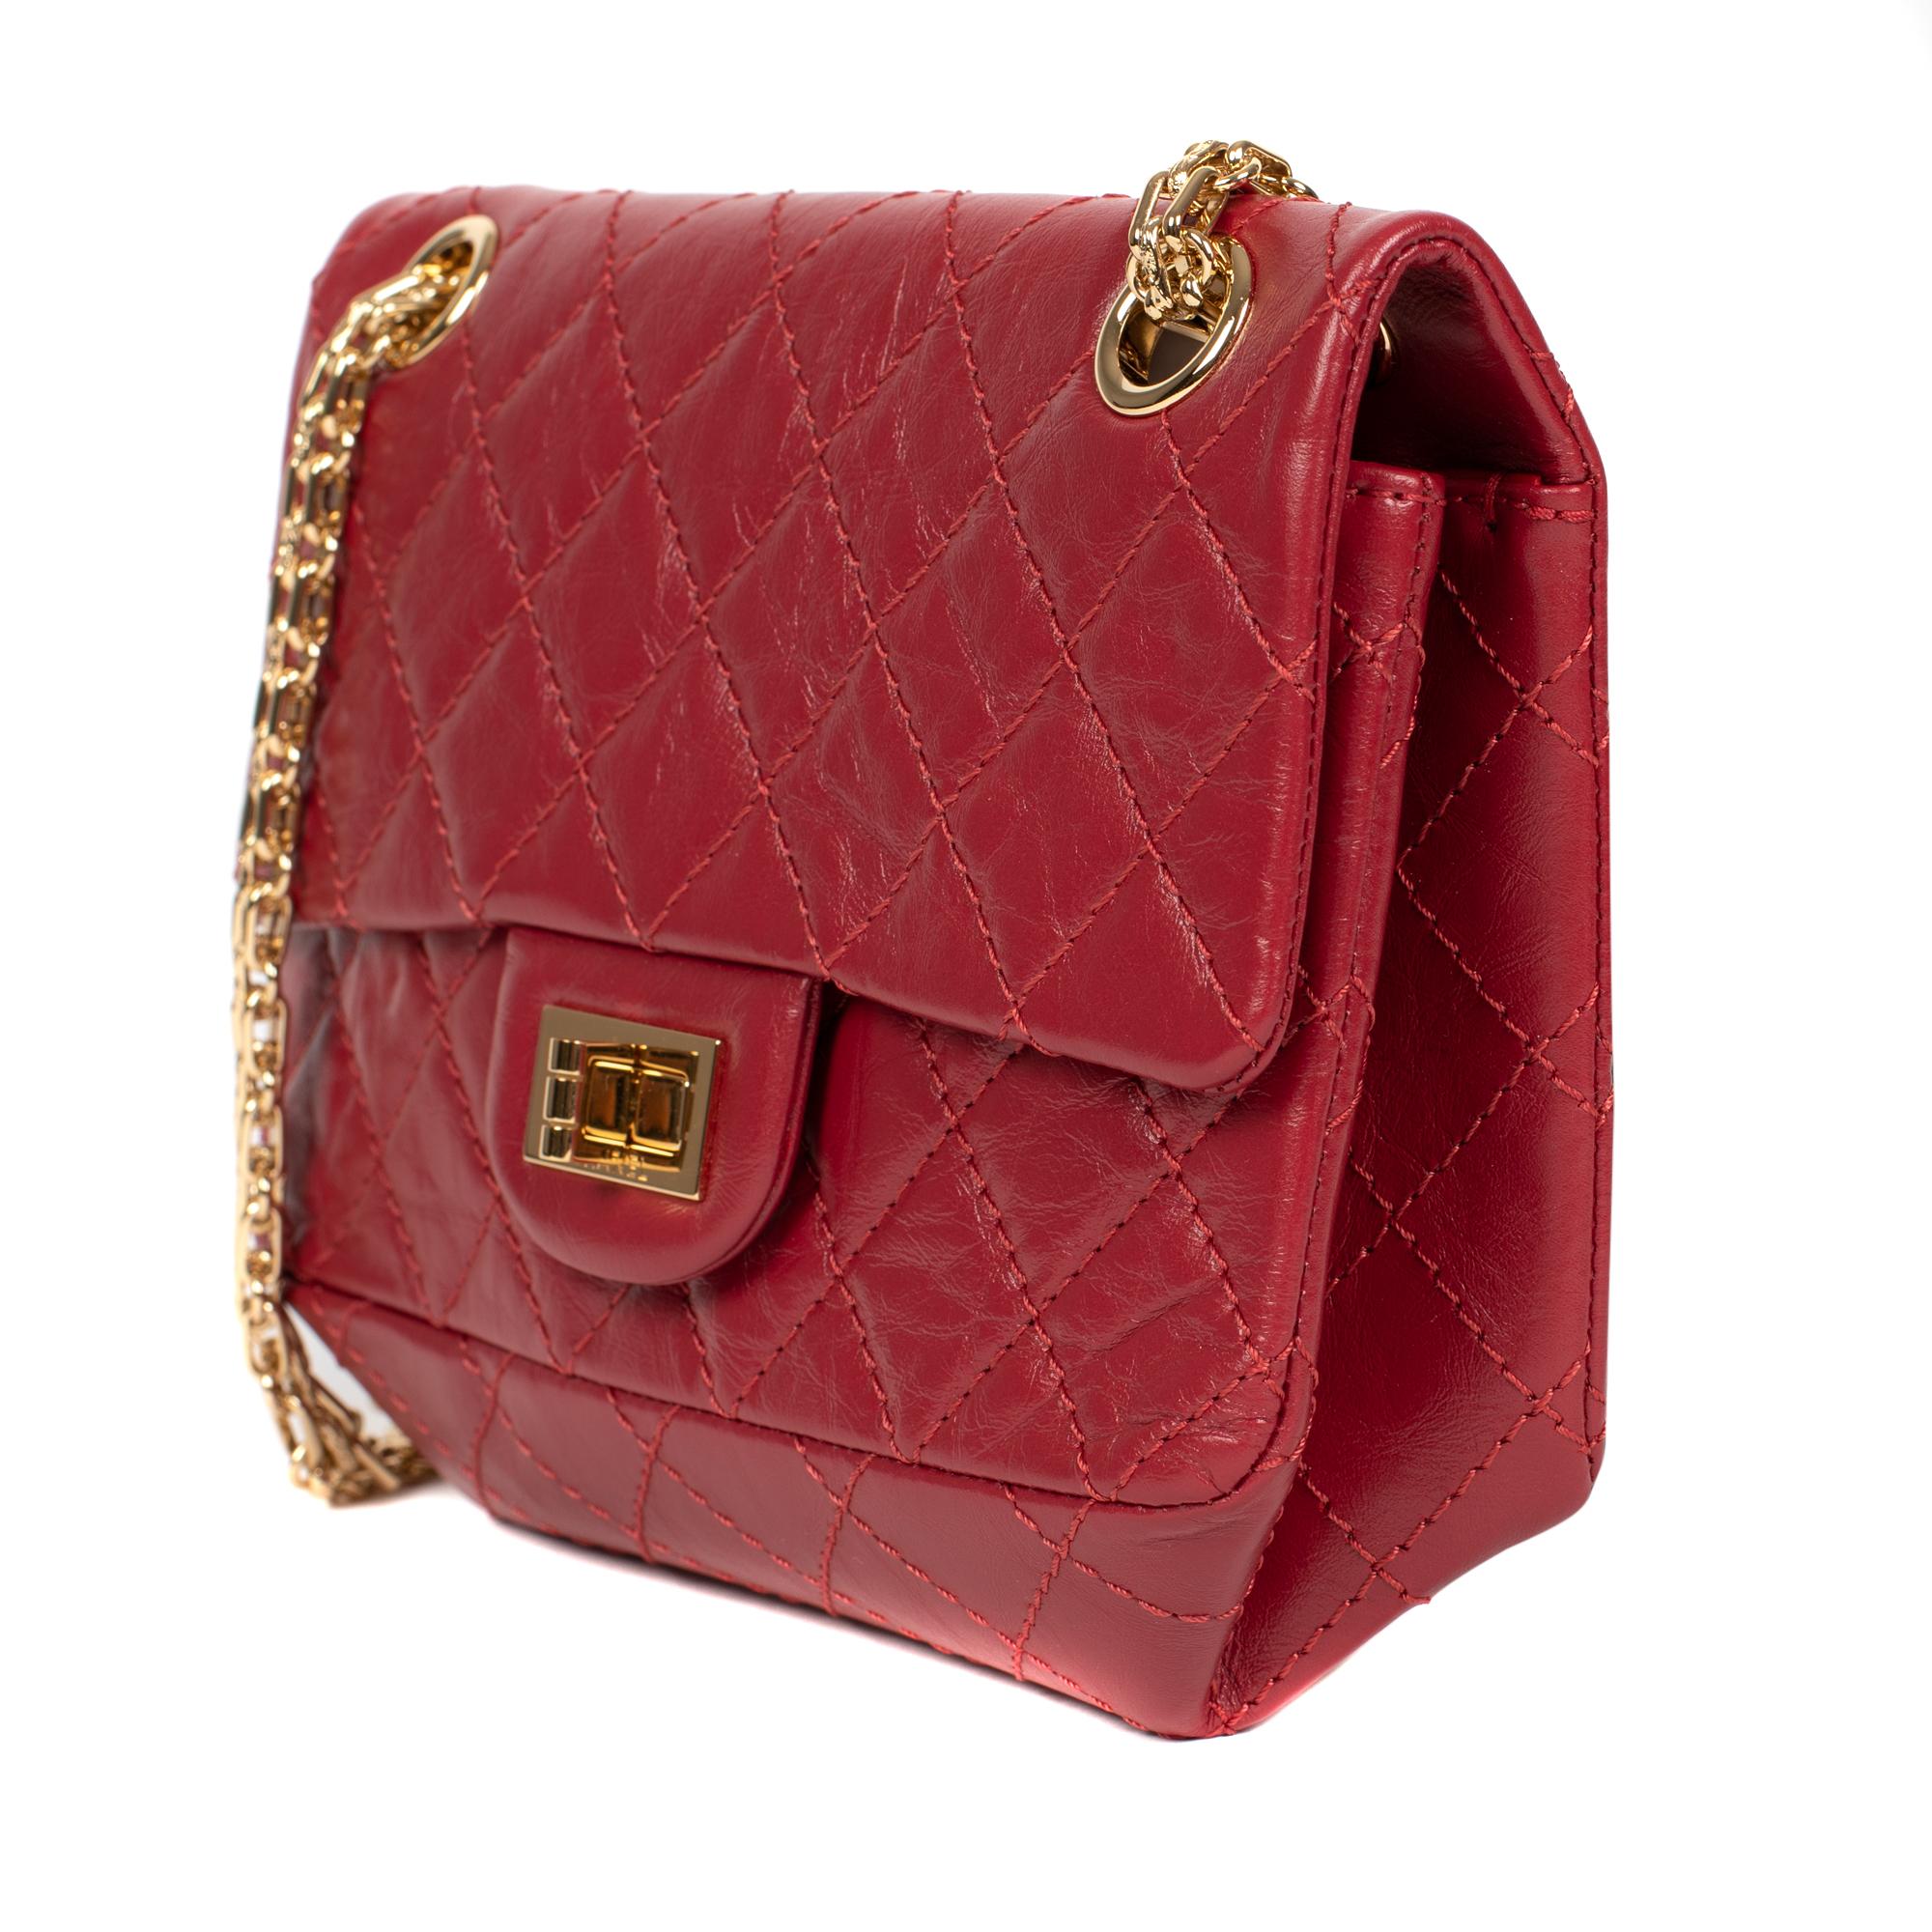 Women's Rare Mini Chanel 2.55 Reissue handbag in red quilted leather, gold hardware